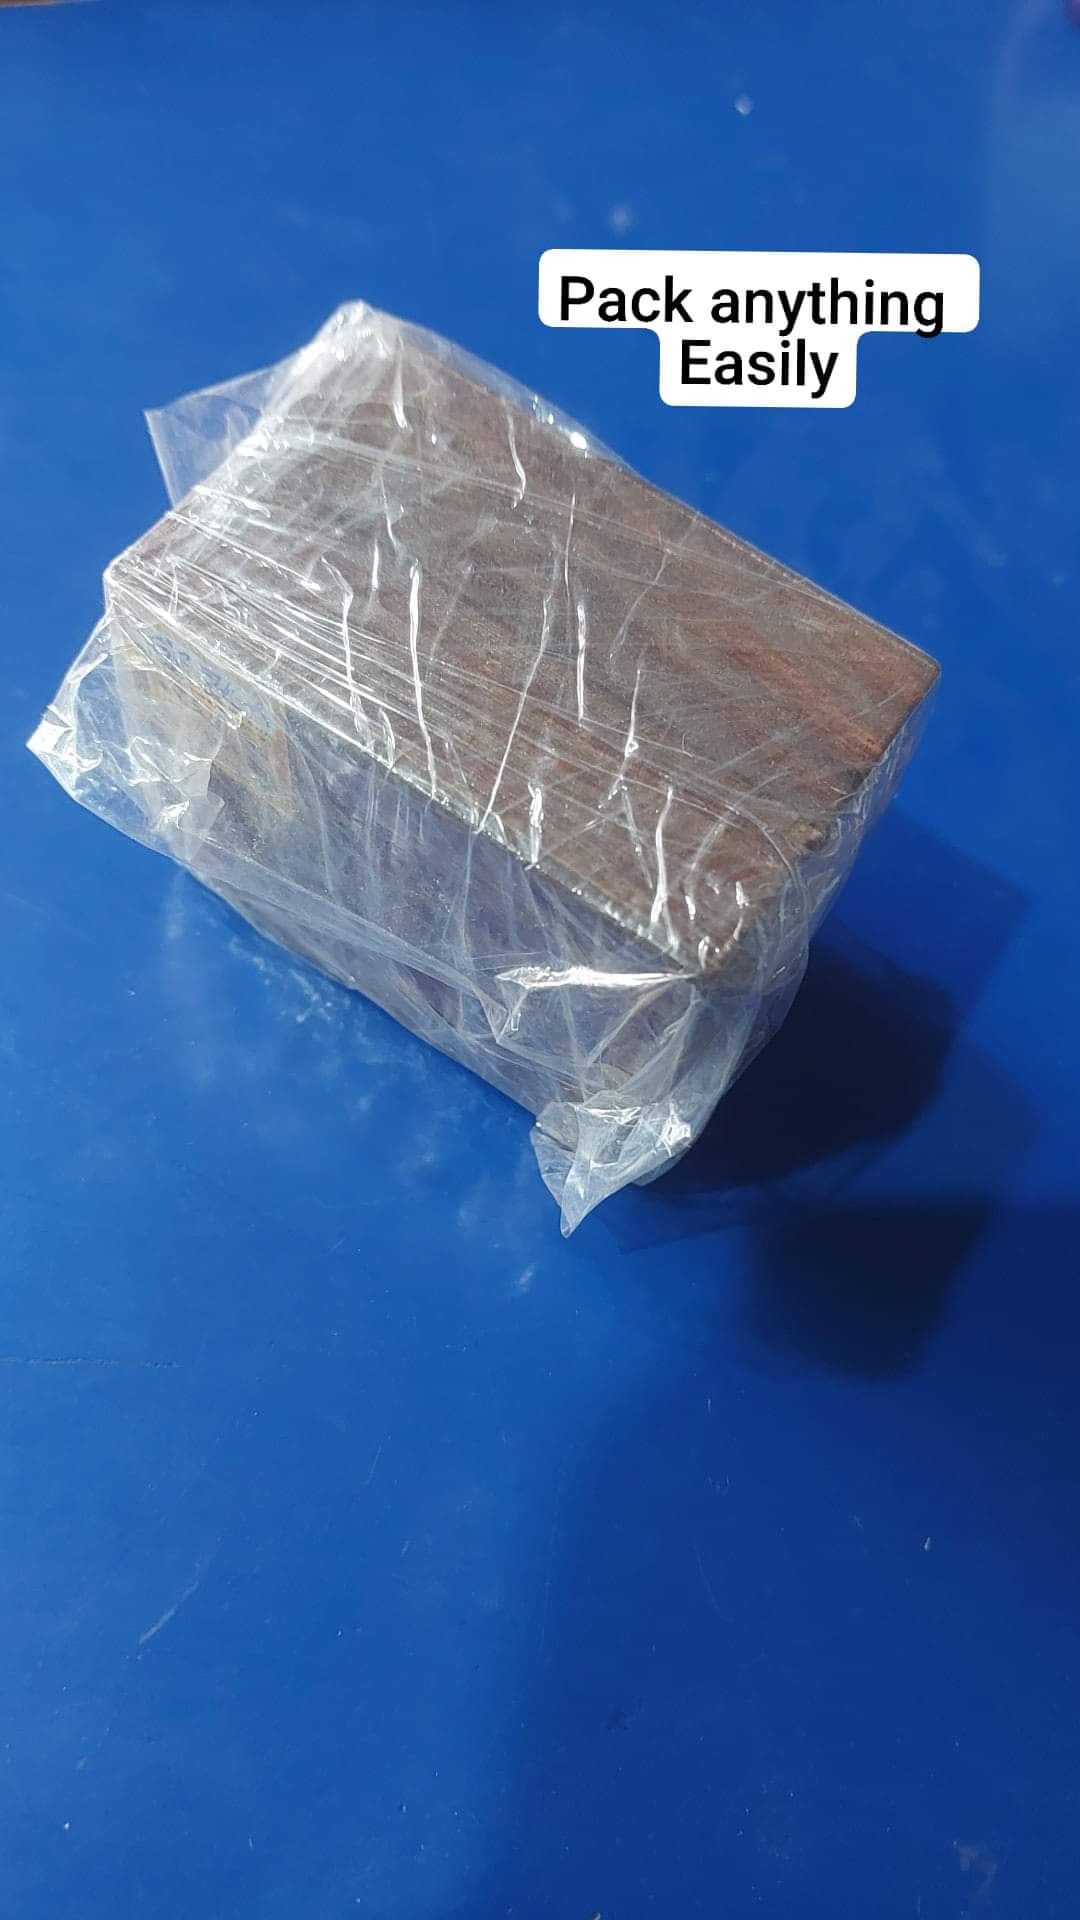 Packing shrink wrap